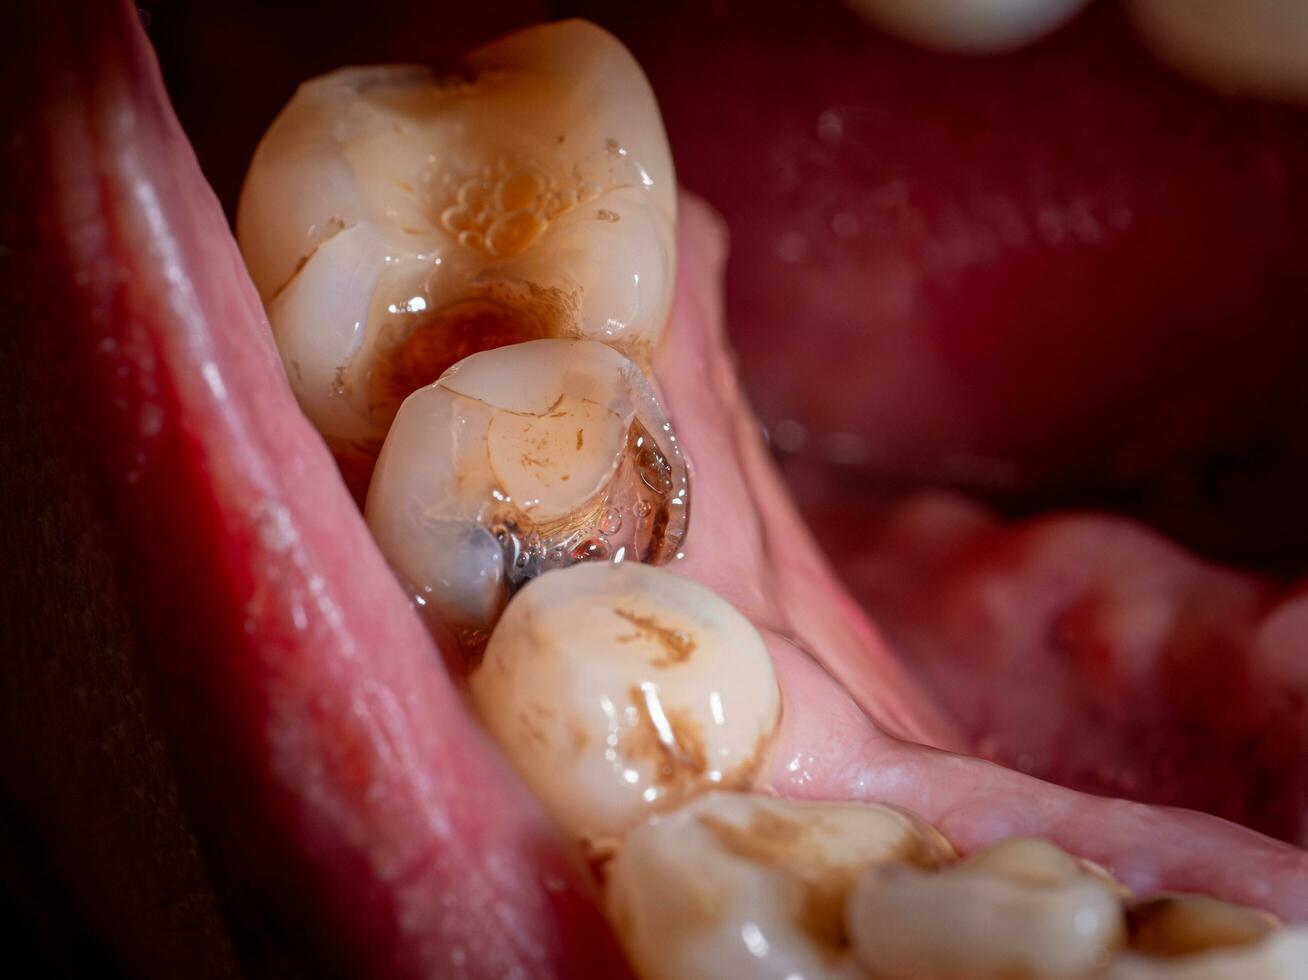 Tooth decay, broken teeth, oral health Poor dental health. Oral health problems. Loose, yellow teeth, plaque and tartar at the edge of the gums photo